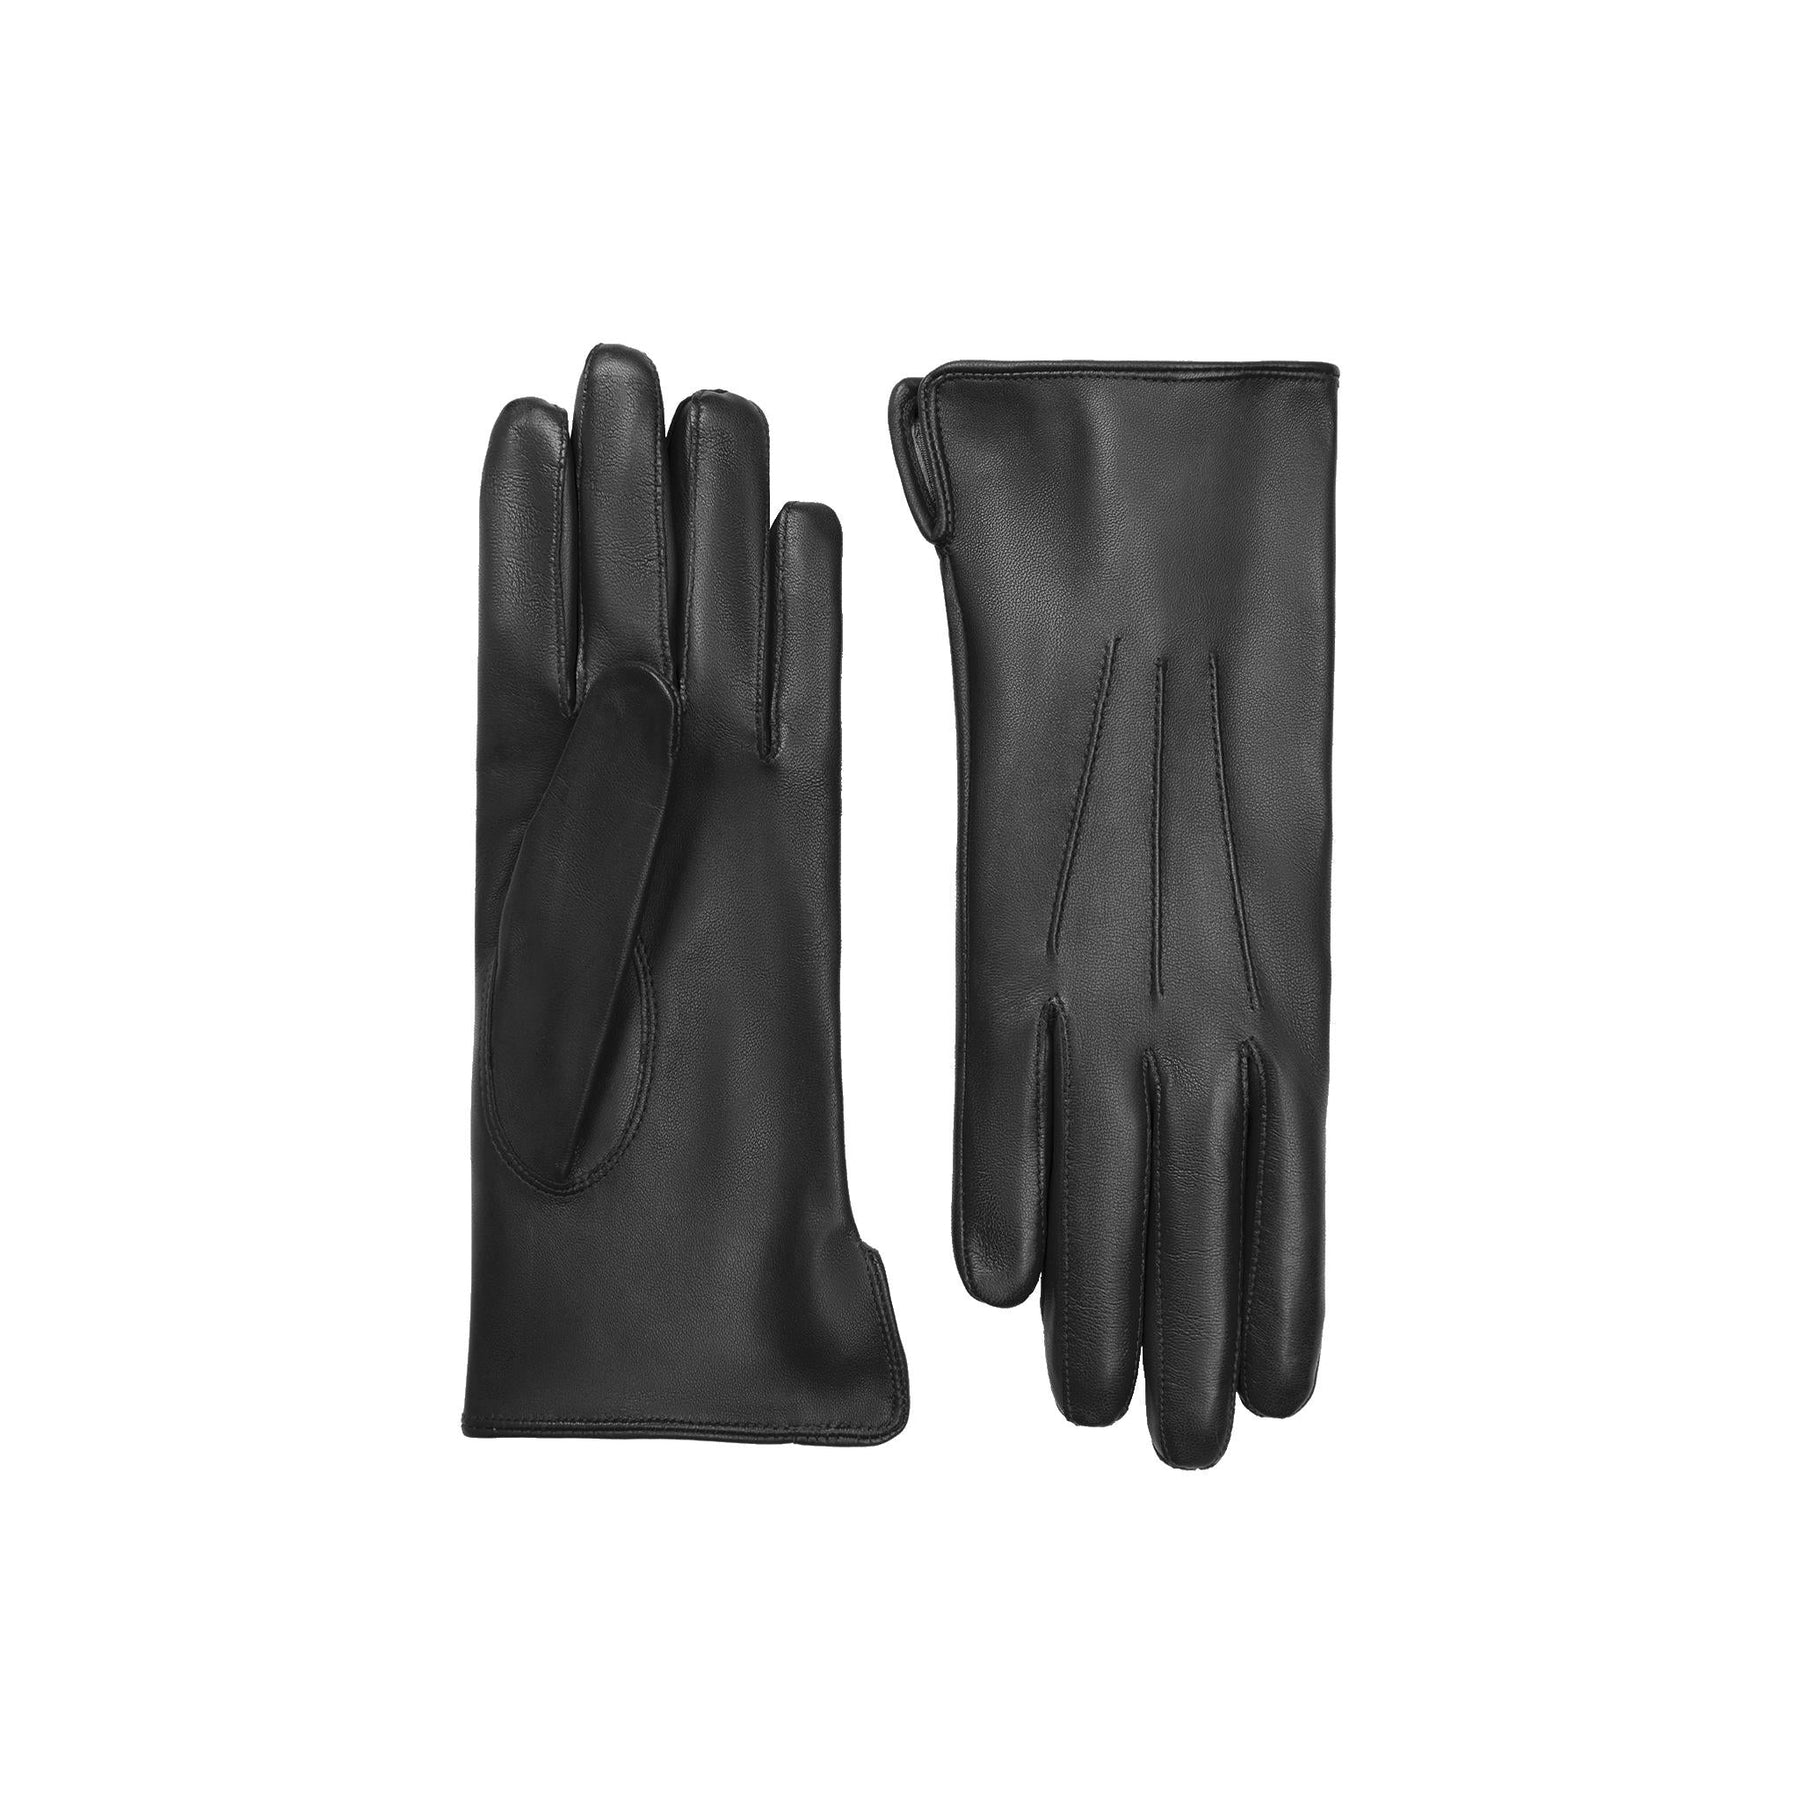 Touchscreen leather gloves for women and men